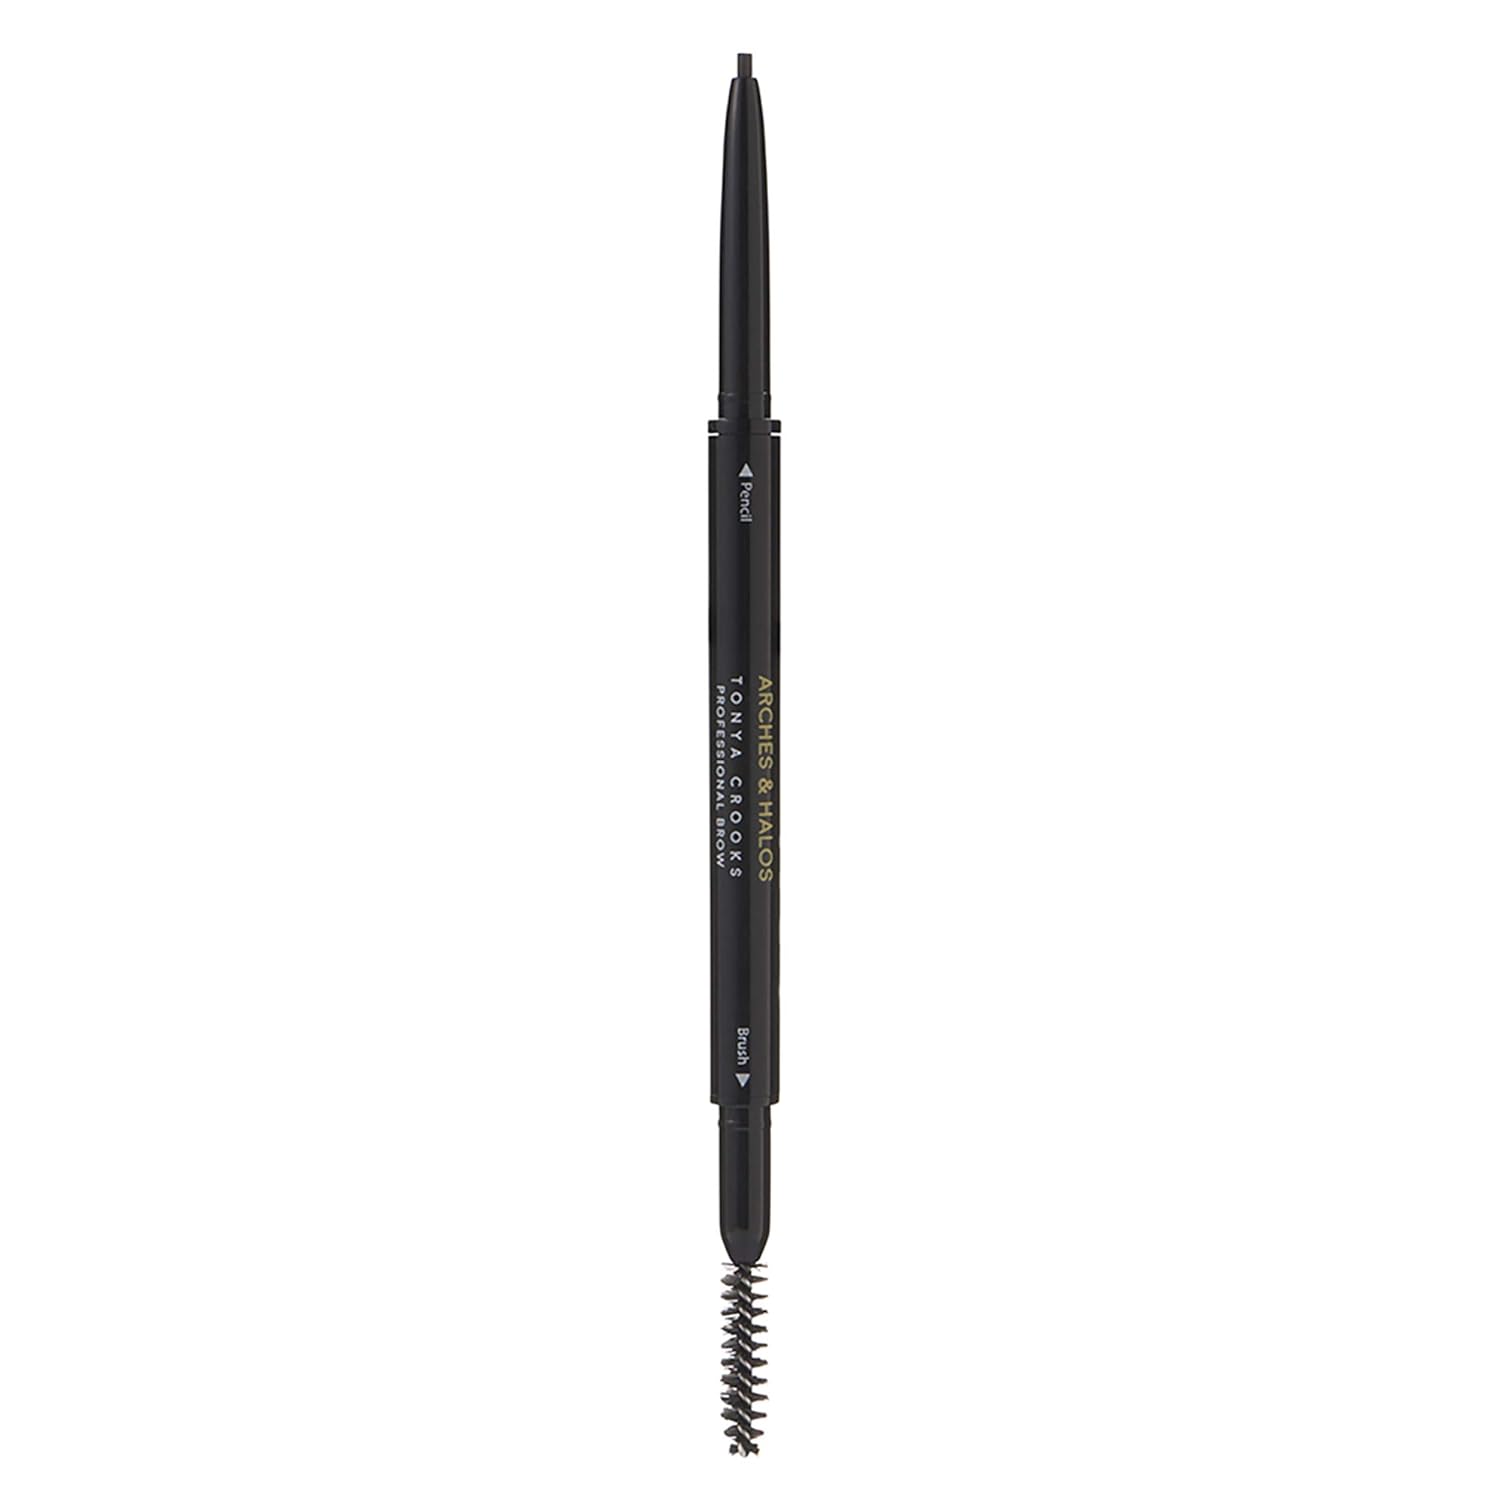 Arches & Halos Micro Defining Brow Pencil - For a Fuller and More Defined Brow, Long-Lasting, Smudge Proof, Rich Color - Dual Ended Pencil with Brush - Vegan and Cruelty Free Makeup - Espresso, 0.003